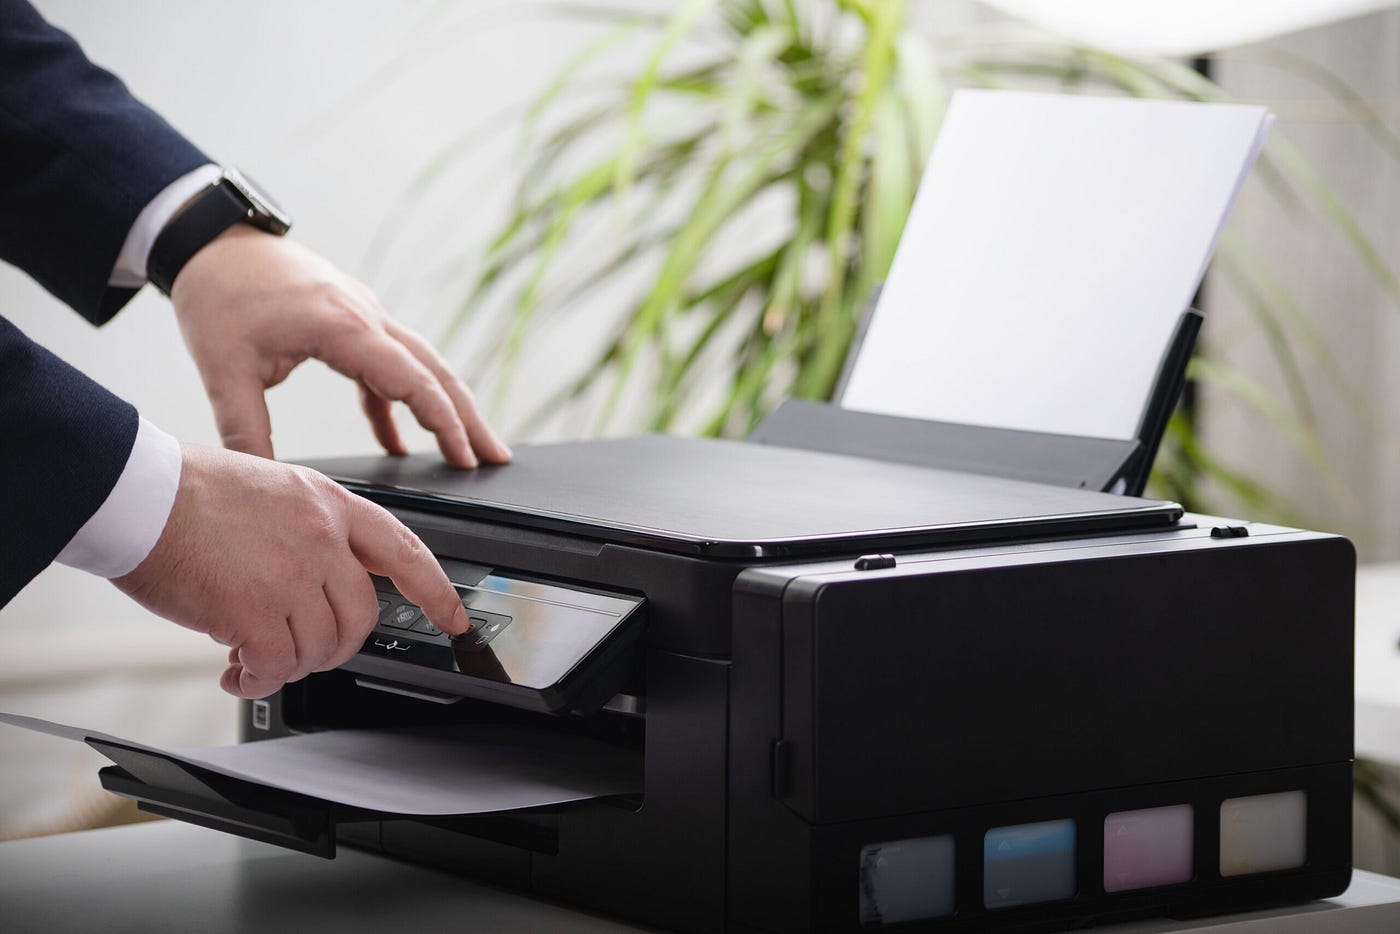 REVIEW: Epson Eco Tank Printer  This May Surprise You! 